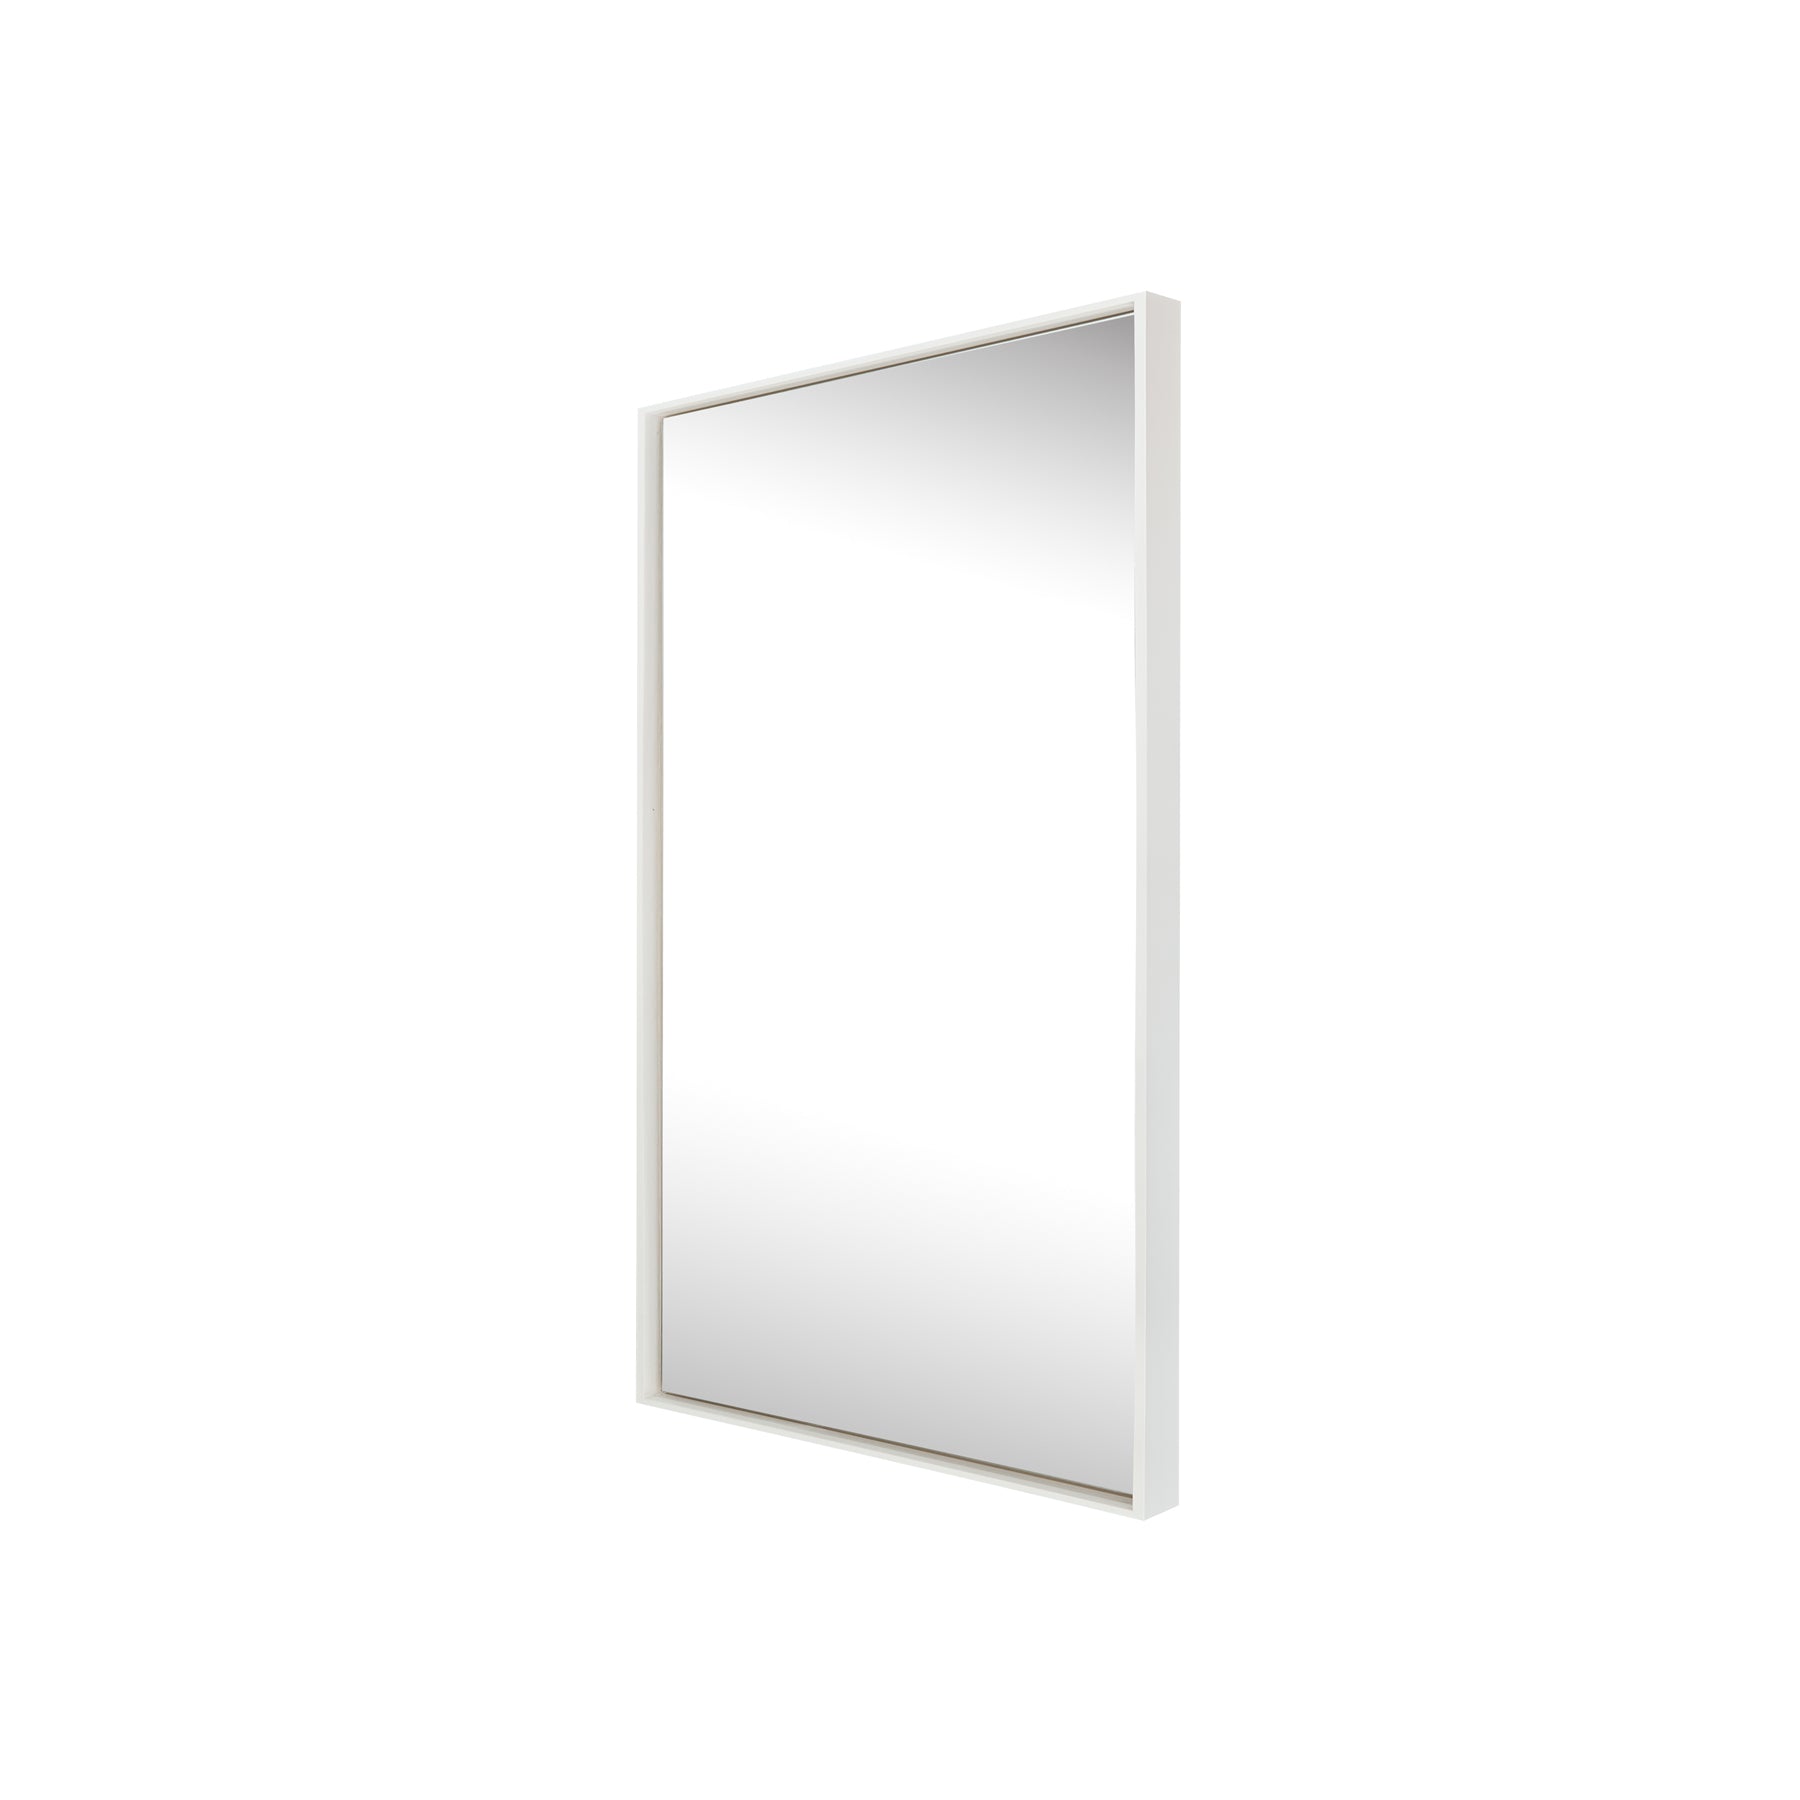 Lily Floating Box Small - White Finish - Paramount Mirrors and Prints